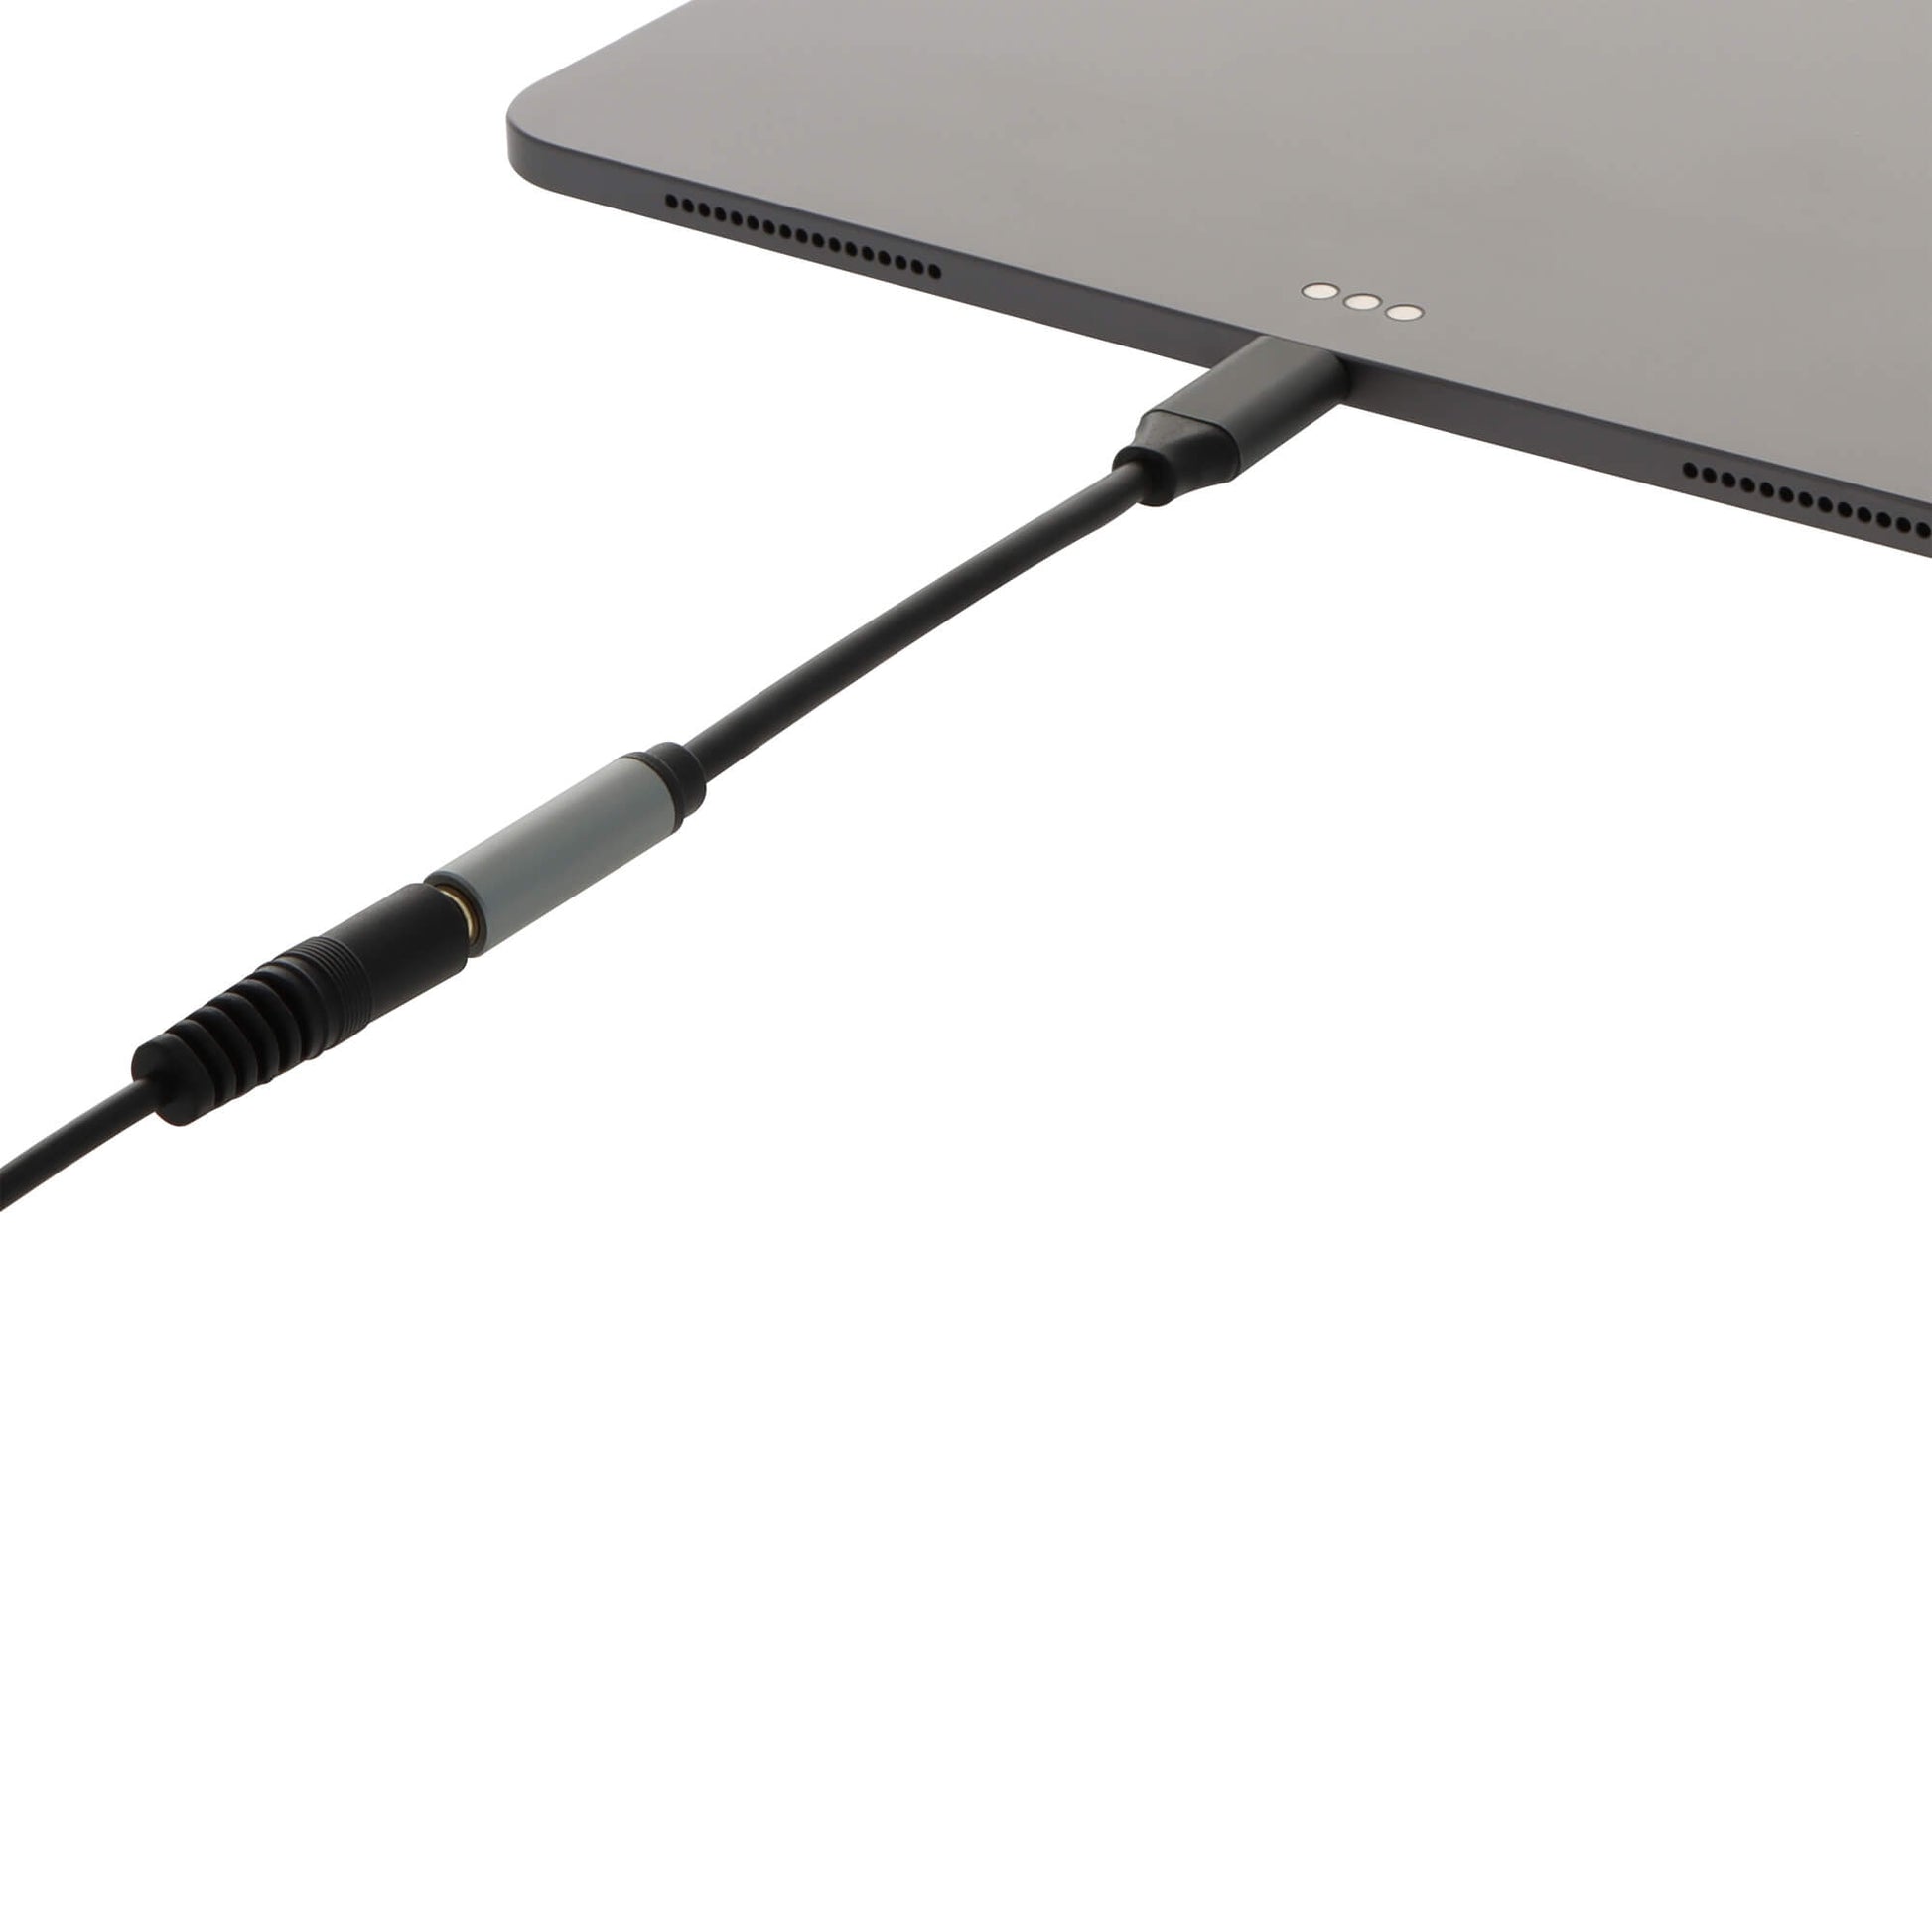 Buy Surface USB-C™ to 3.5mm Audio Adapter - Microsoft Store